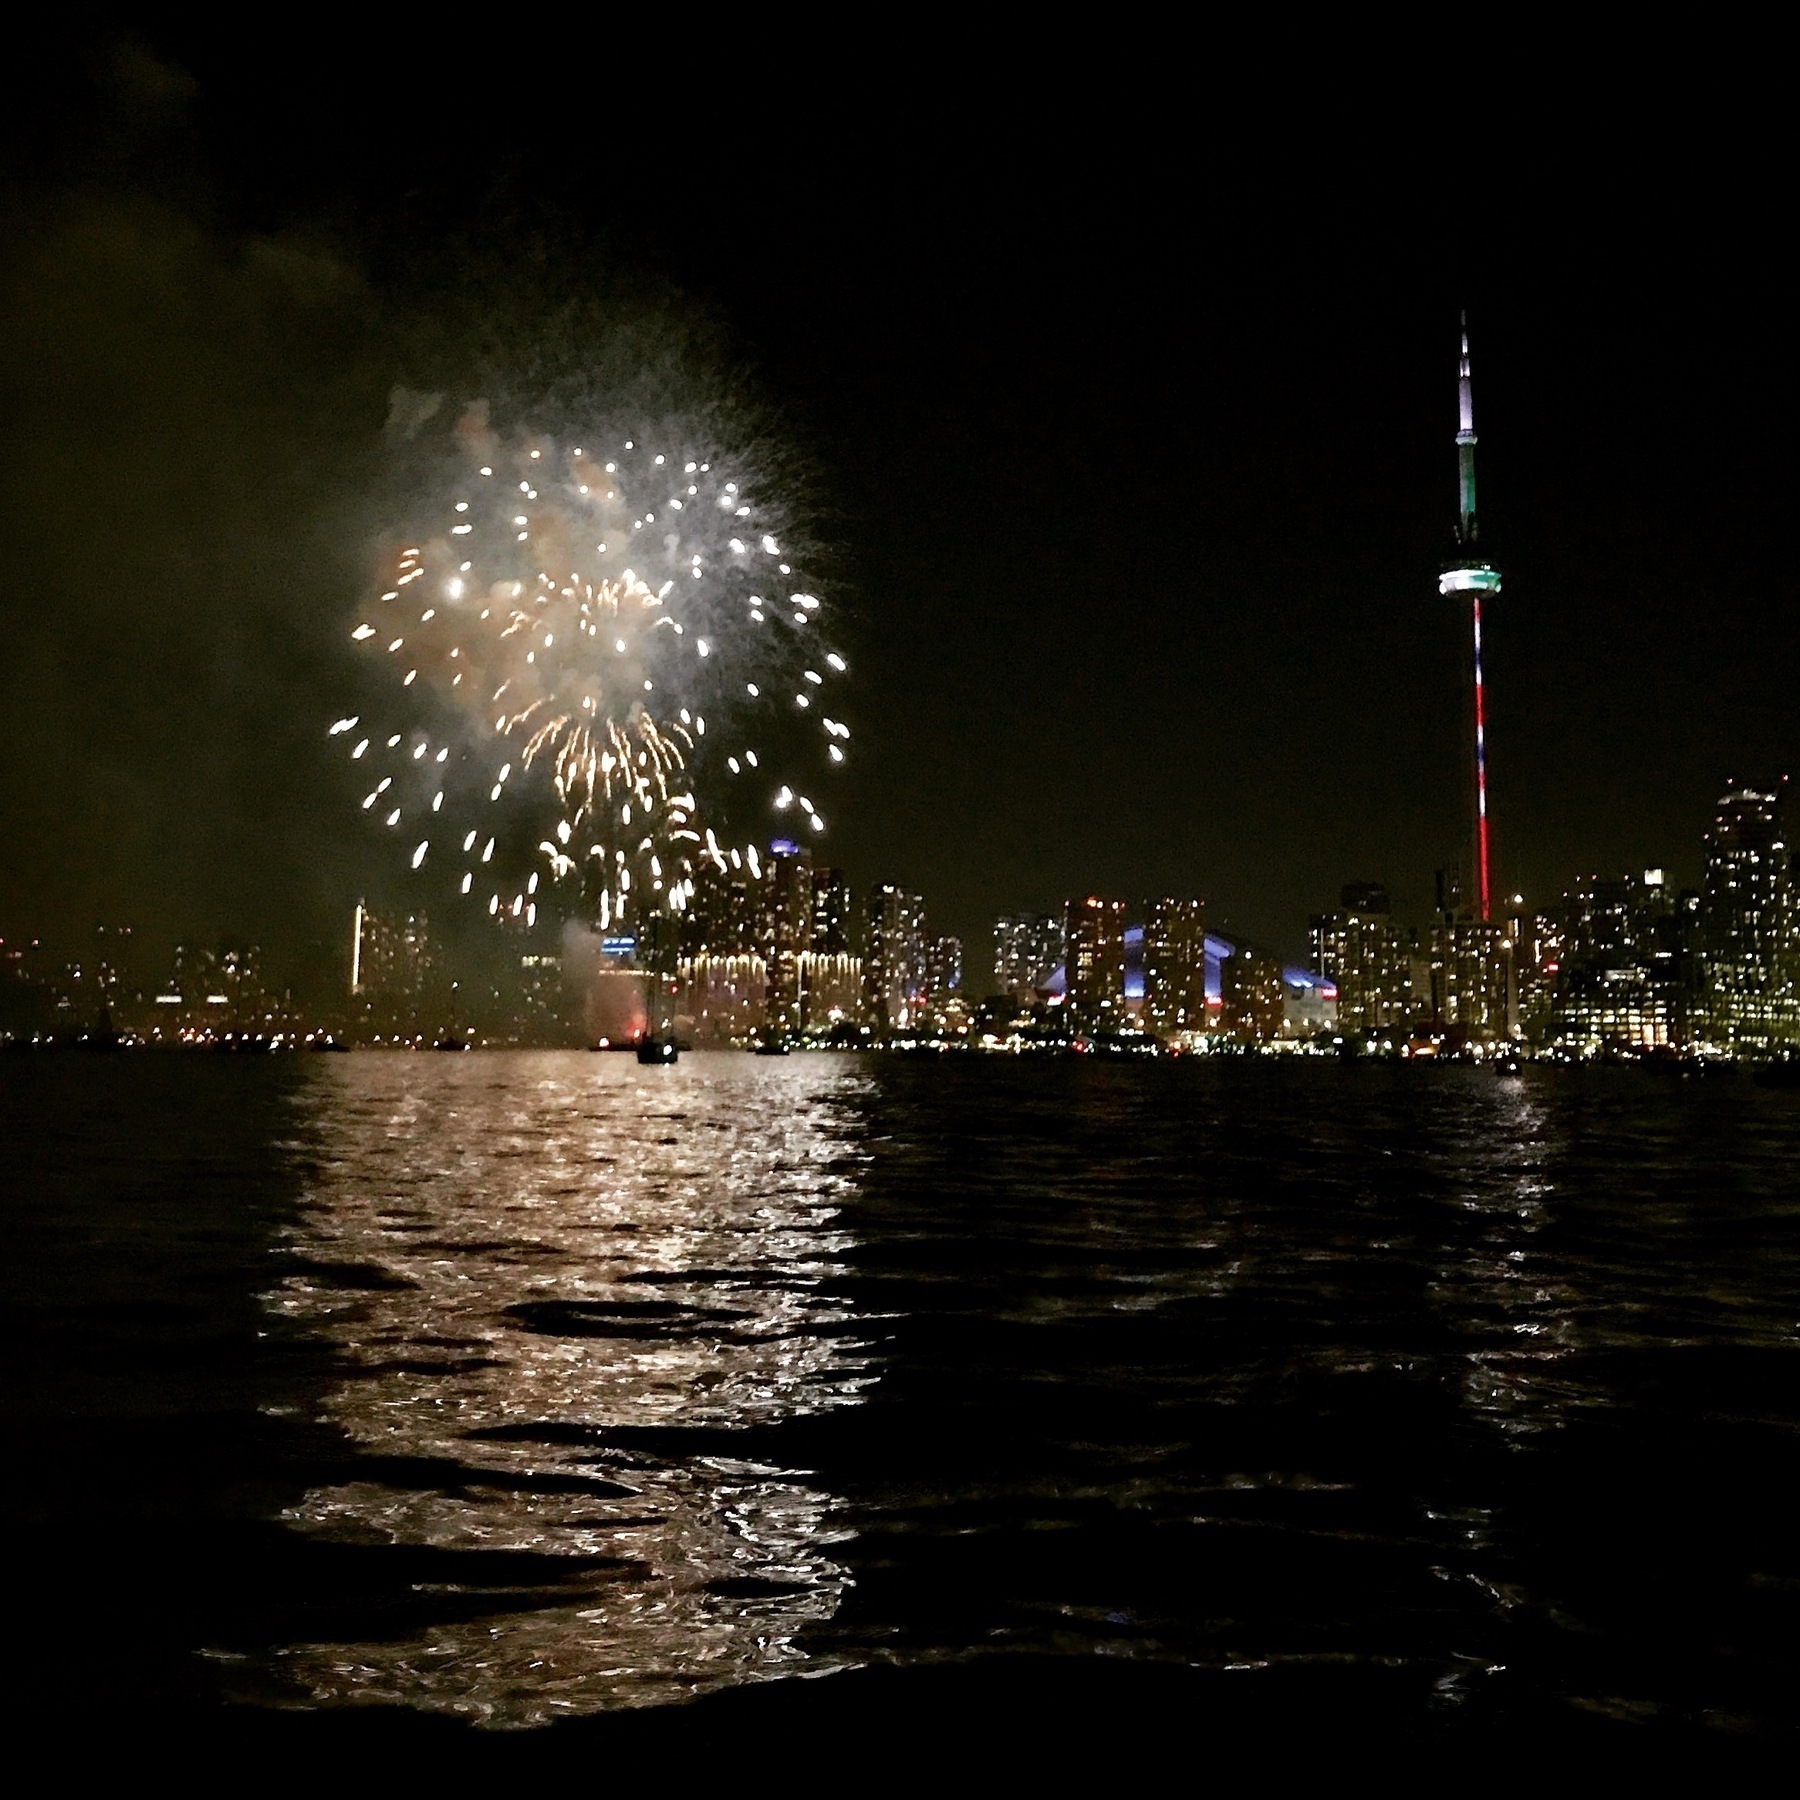 Fireworks on the left with CN Tower light up on the right against a dark sky. Taken from the lake with reflections on the water